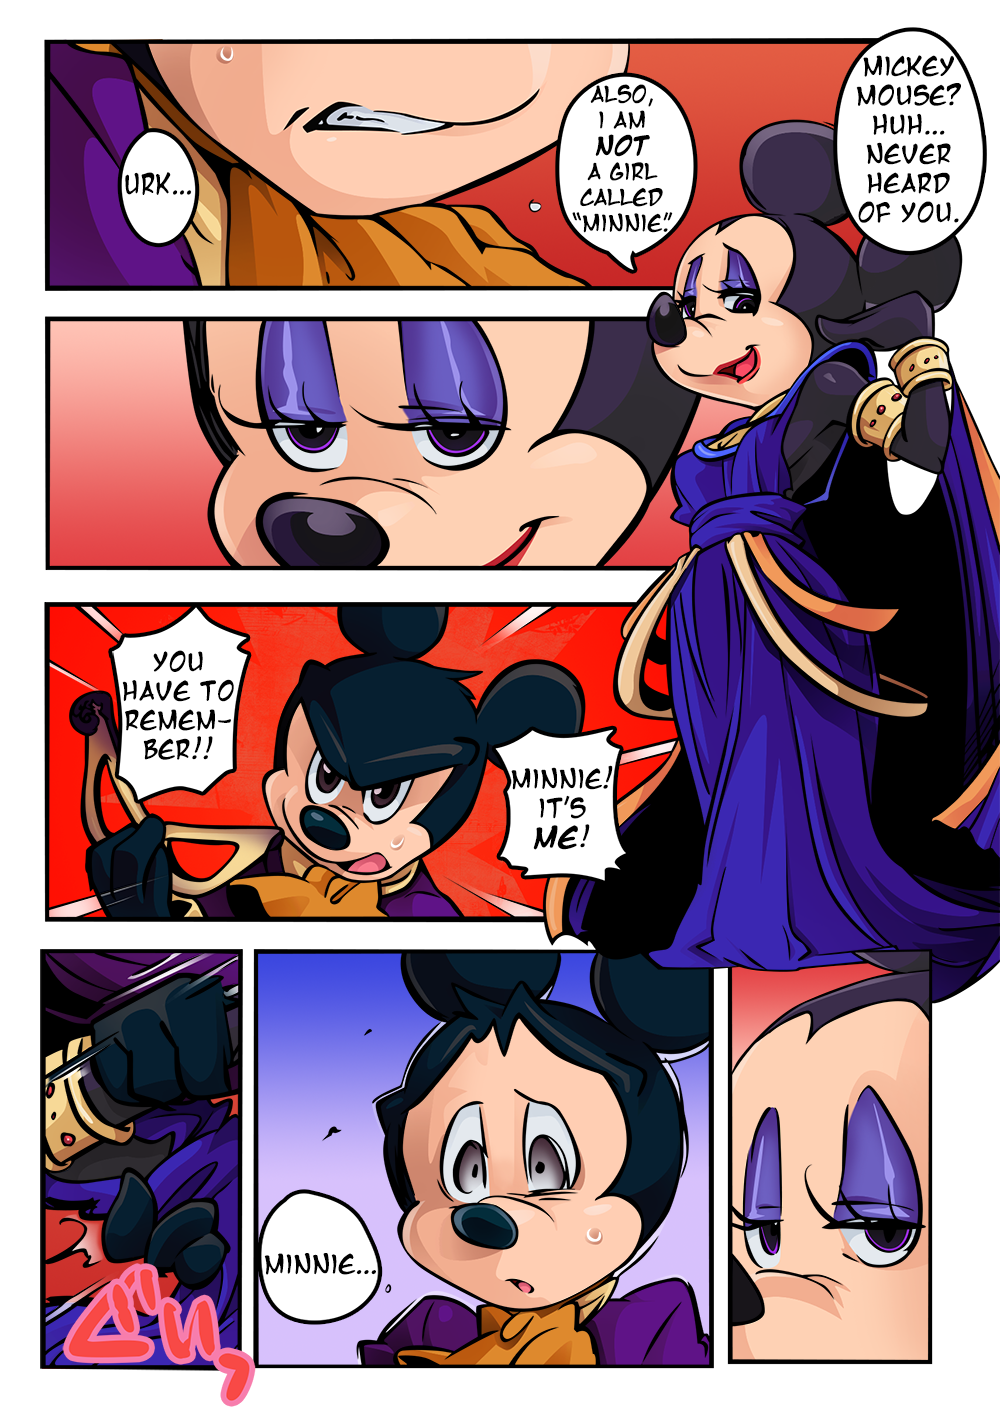 hentaib - Mickey and the Queen, Page 2. Posts by Nearphotison. 